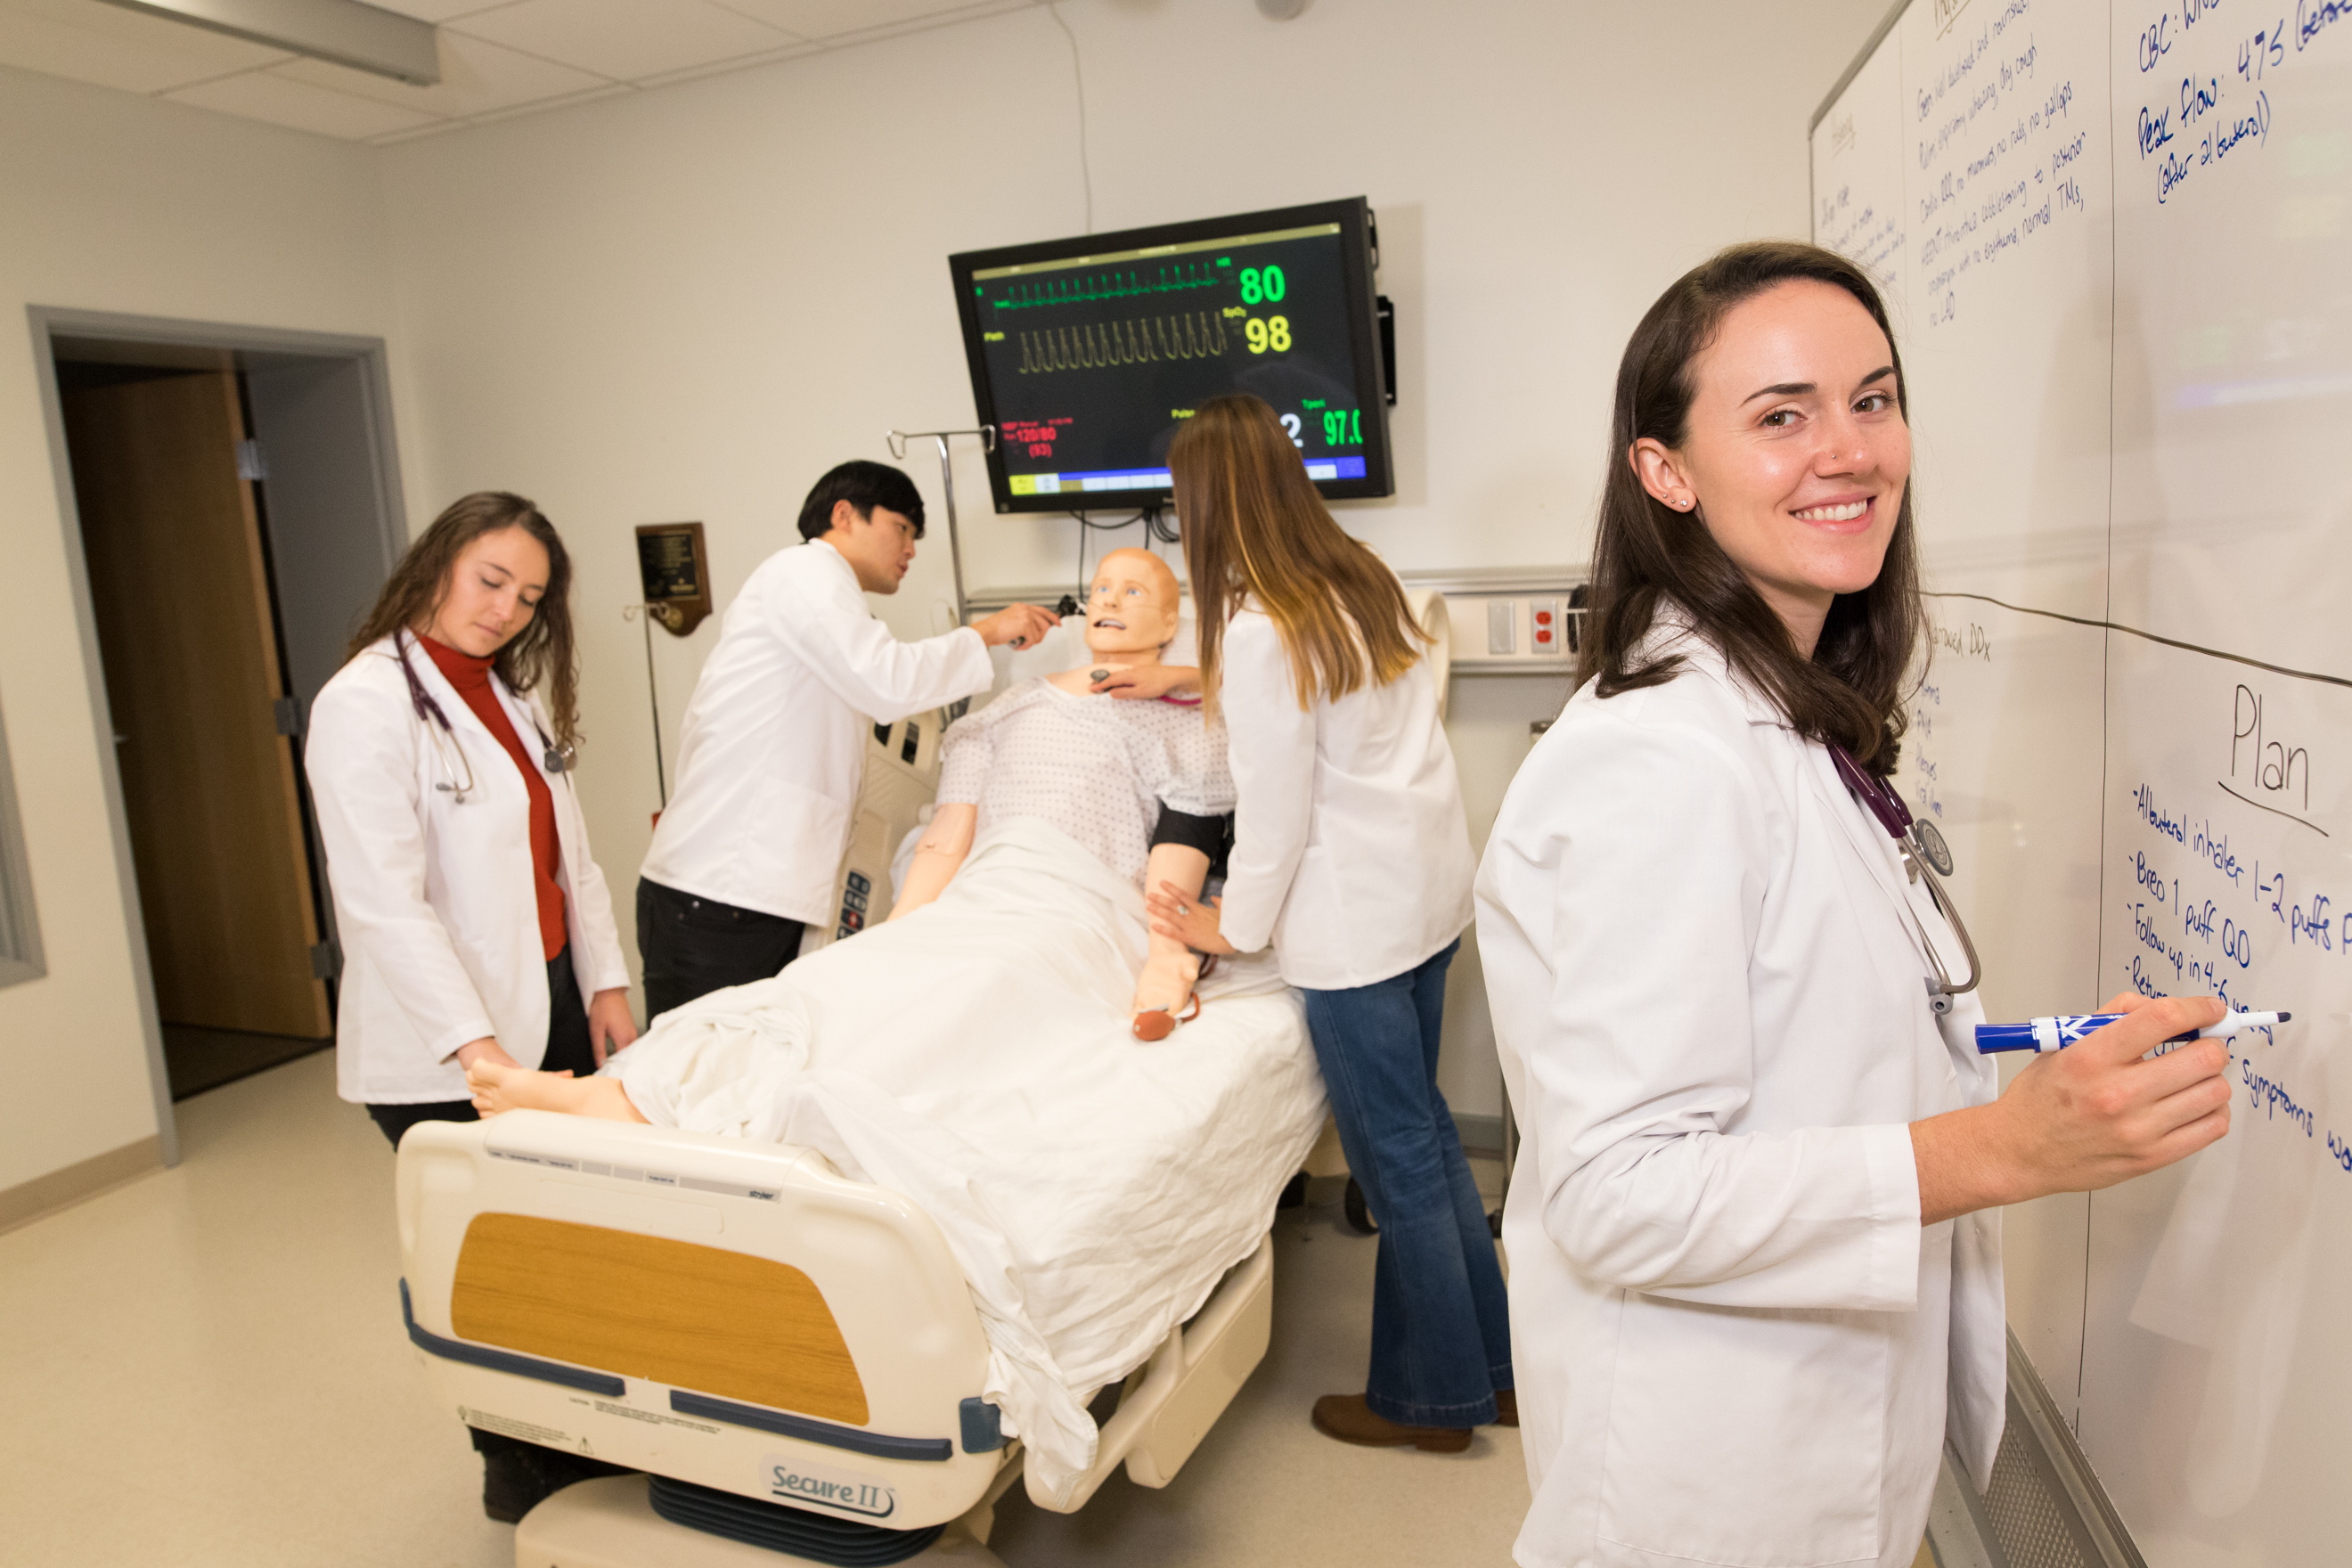 Four physician assistant program students demonstrate care on a dummy body lying in a hospital bed.